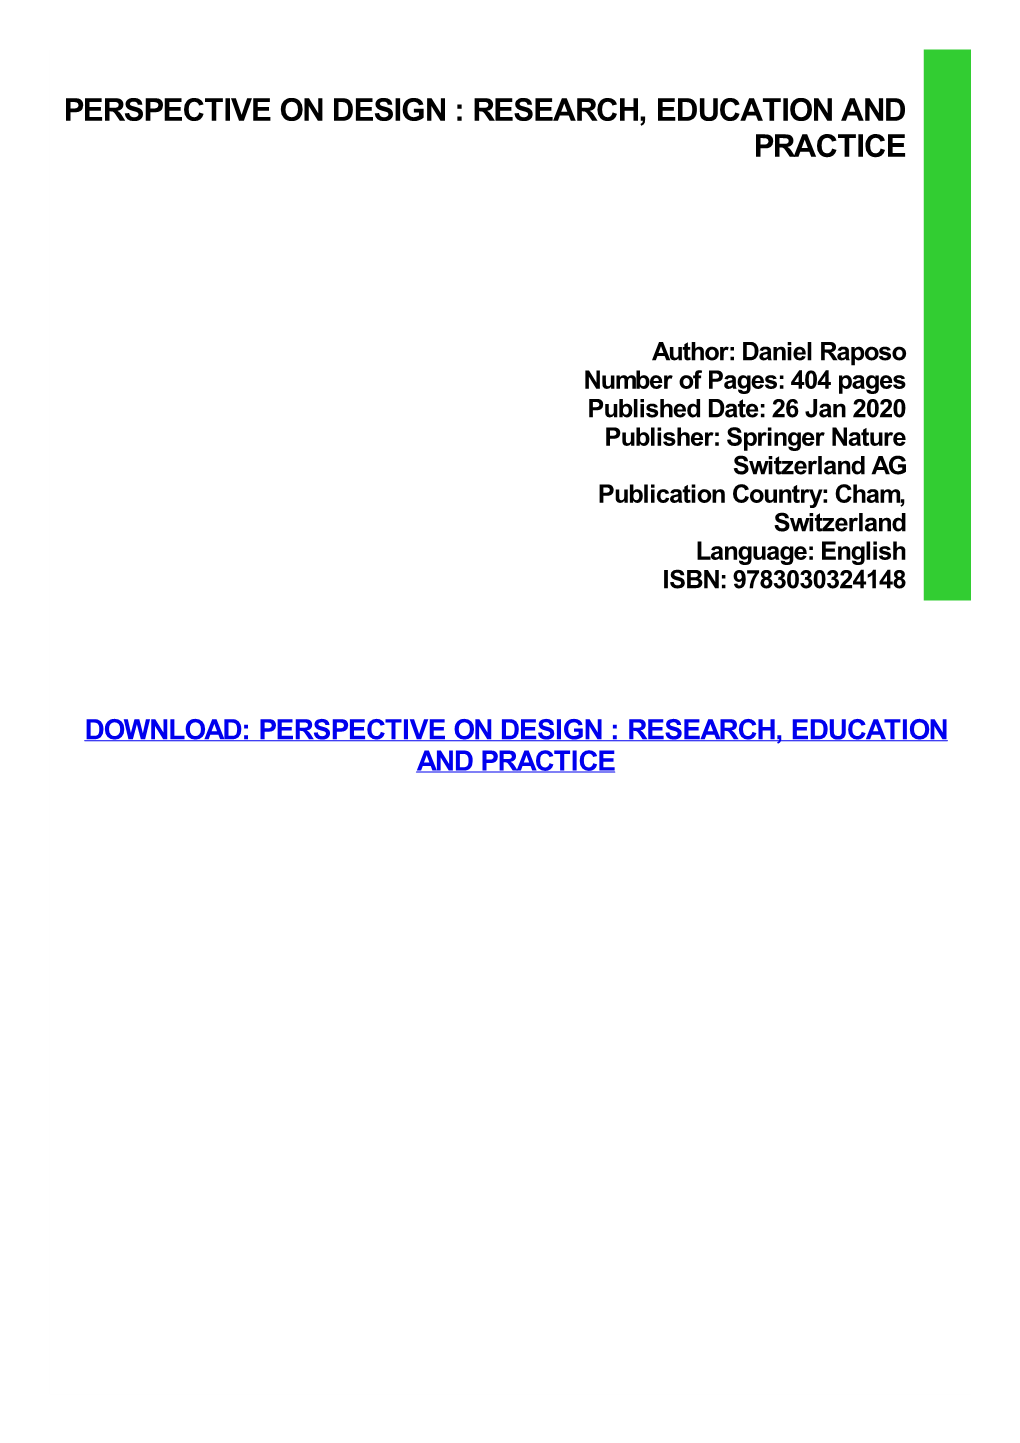 Perspective on Design : Research, Education and Practice